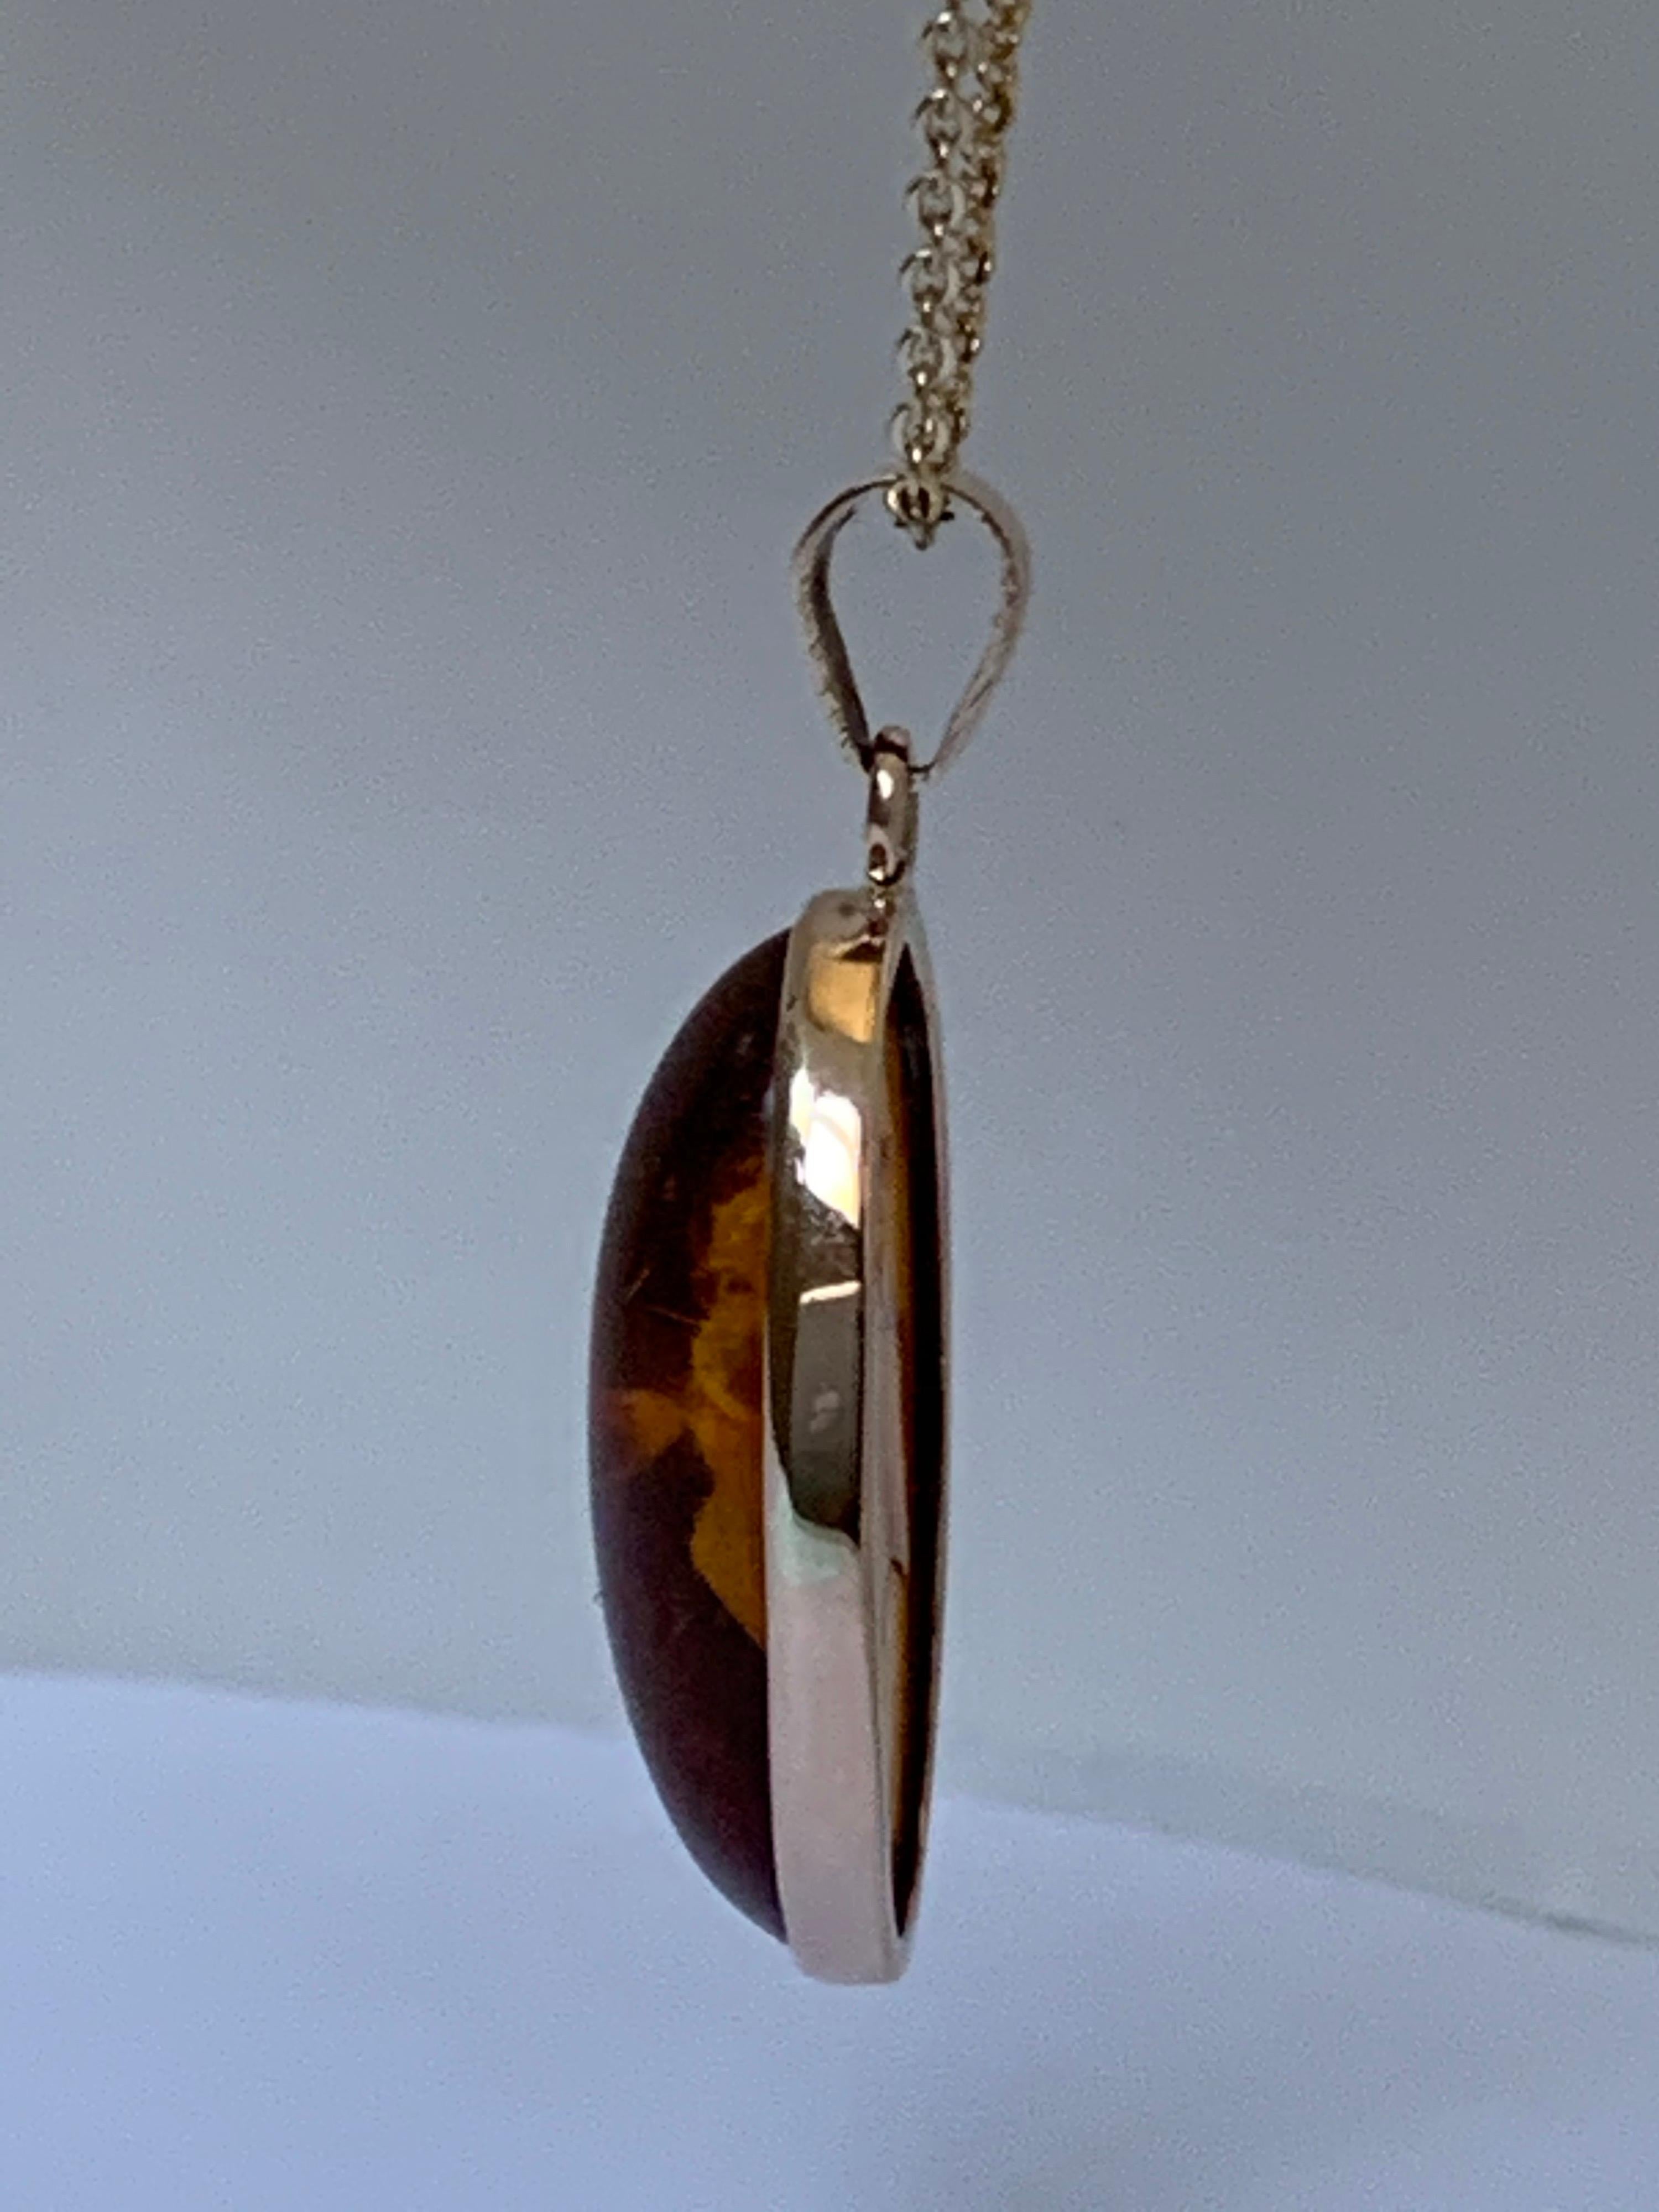 Natural Amber 15 mm X 24 set in 14 Karat Gold is one of a kind hand crafted Pendant.